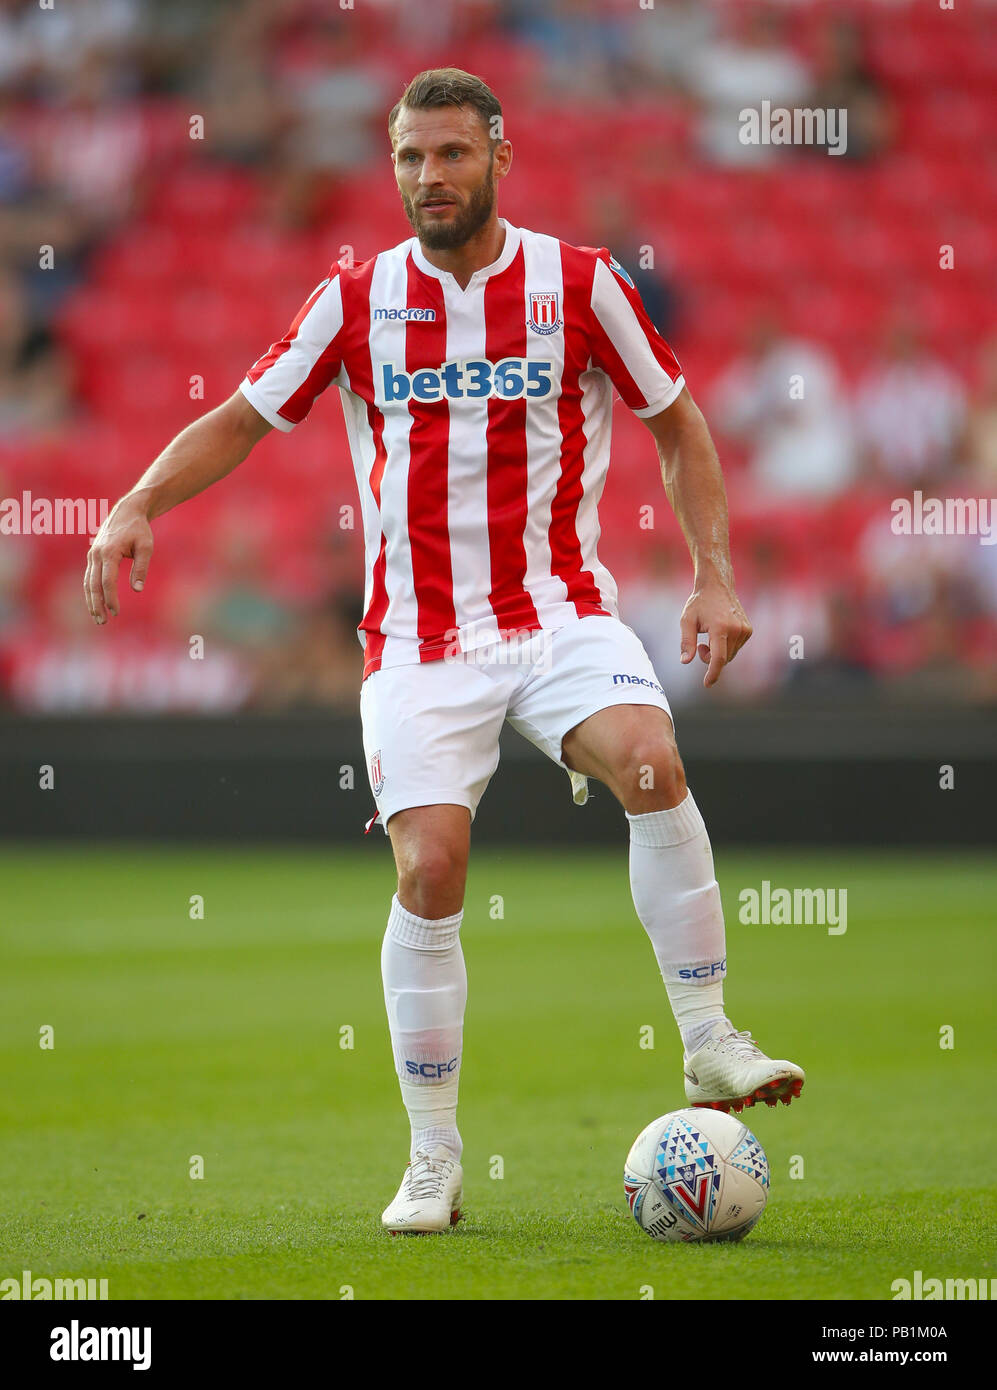 Stoke City's Erik Pieters during a pre season friendly match at The Bet365 Stadium, Stoke. PRESS ASSOCIATION Photo. Picture date: Wednesday July 25, 2018. Photo credit should read: Nick Potts/PA Wire. EDITORIAL USE ONLY No use with unauthorised audio, video, data, fixture lists, club/league logos or 'live' services. Online in-match use limited to 75 images, no video emulation. No use in betting, games or single club/league/player publications. Stock Photo